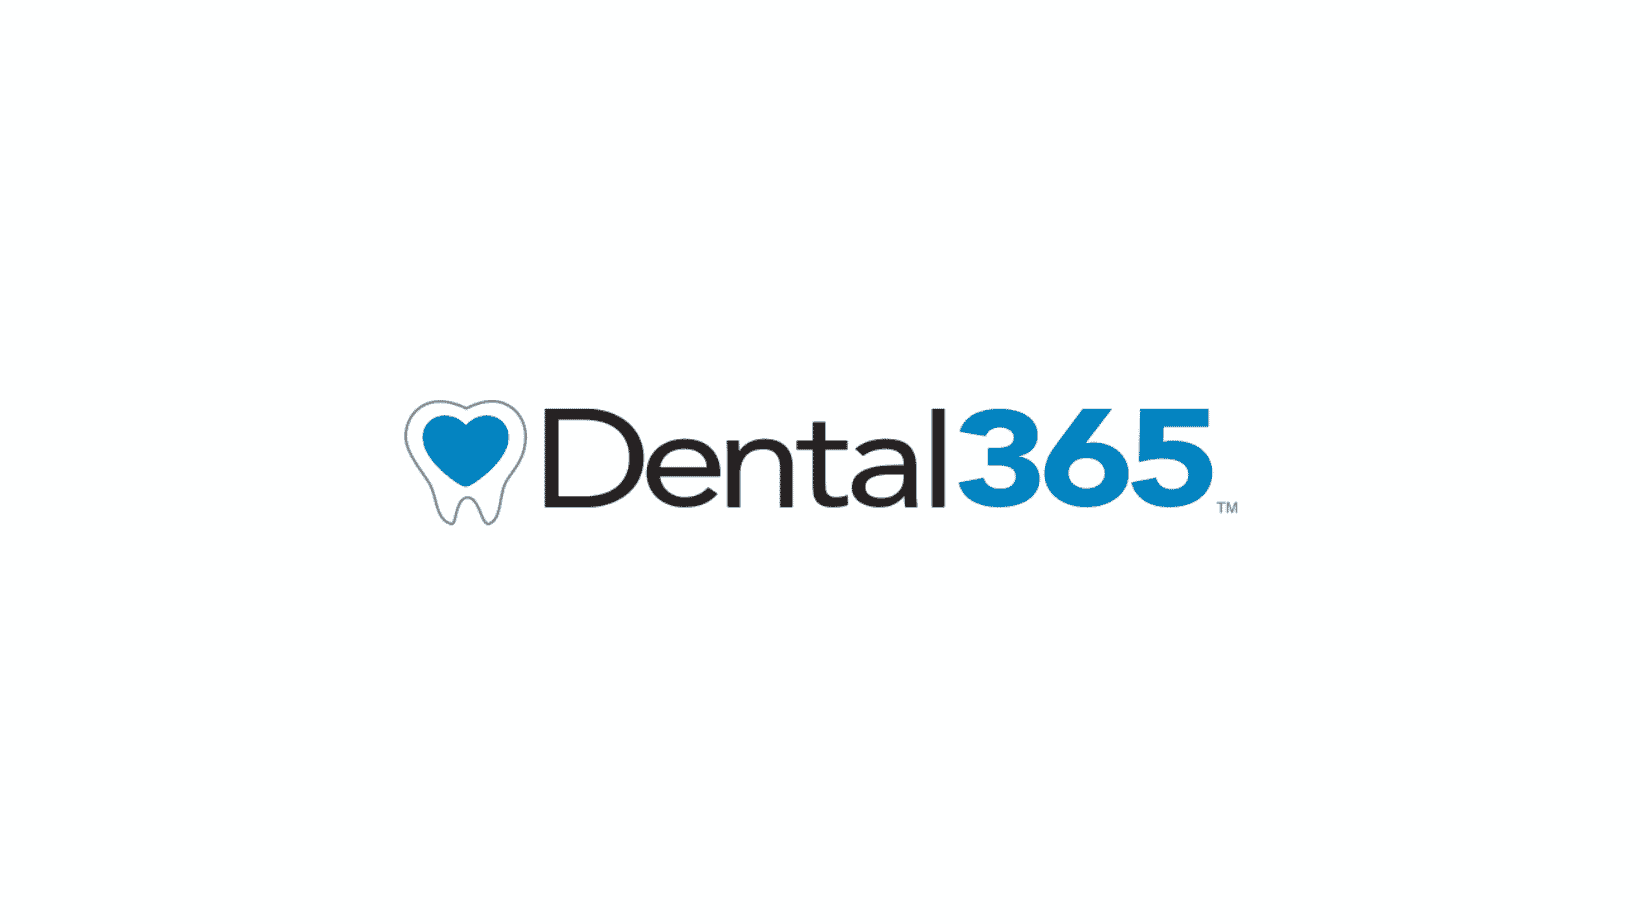 Dental365 Set to Open 100th Location